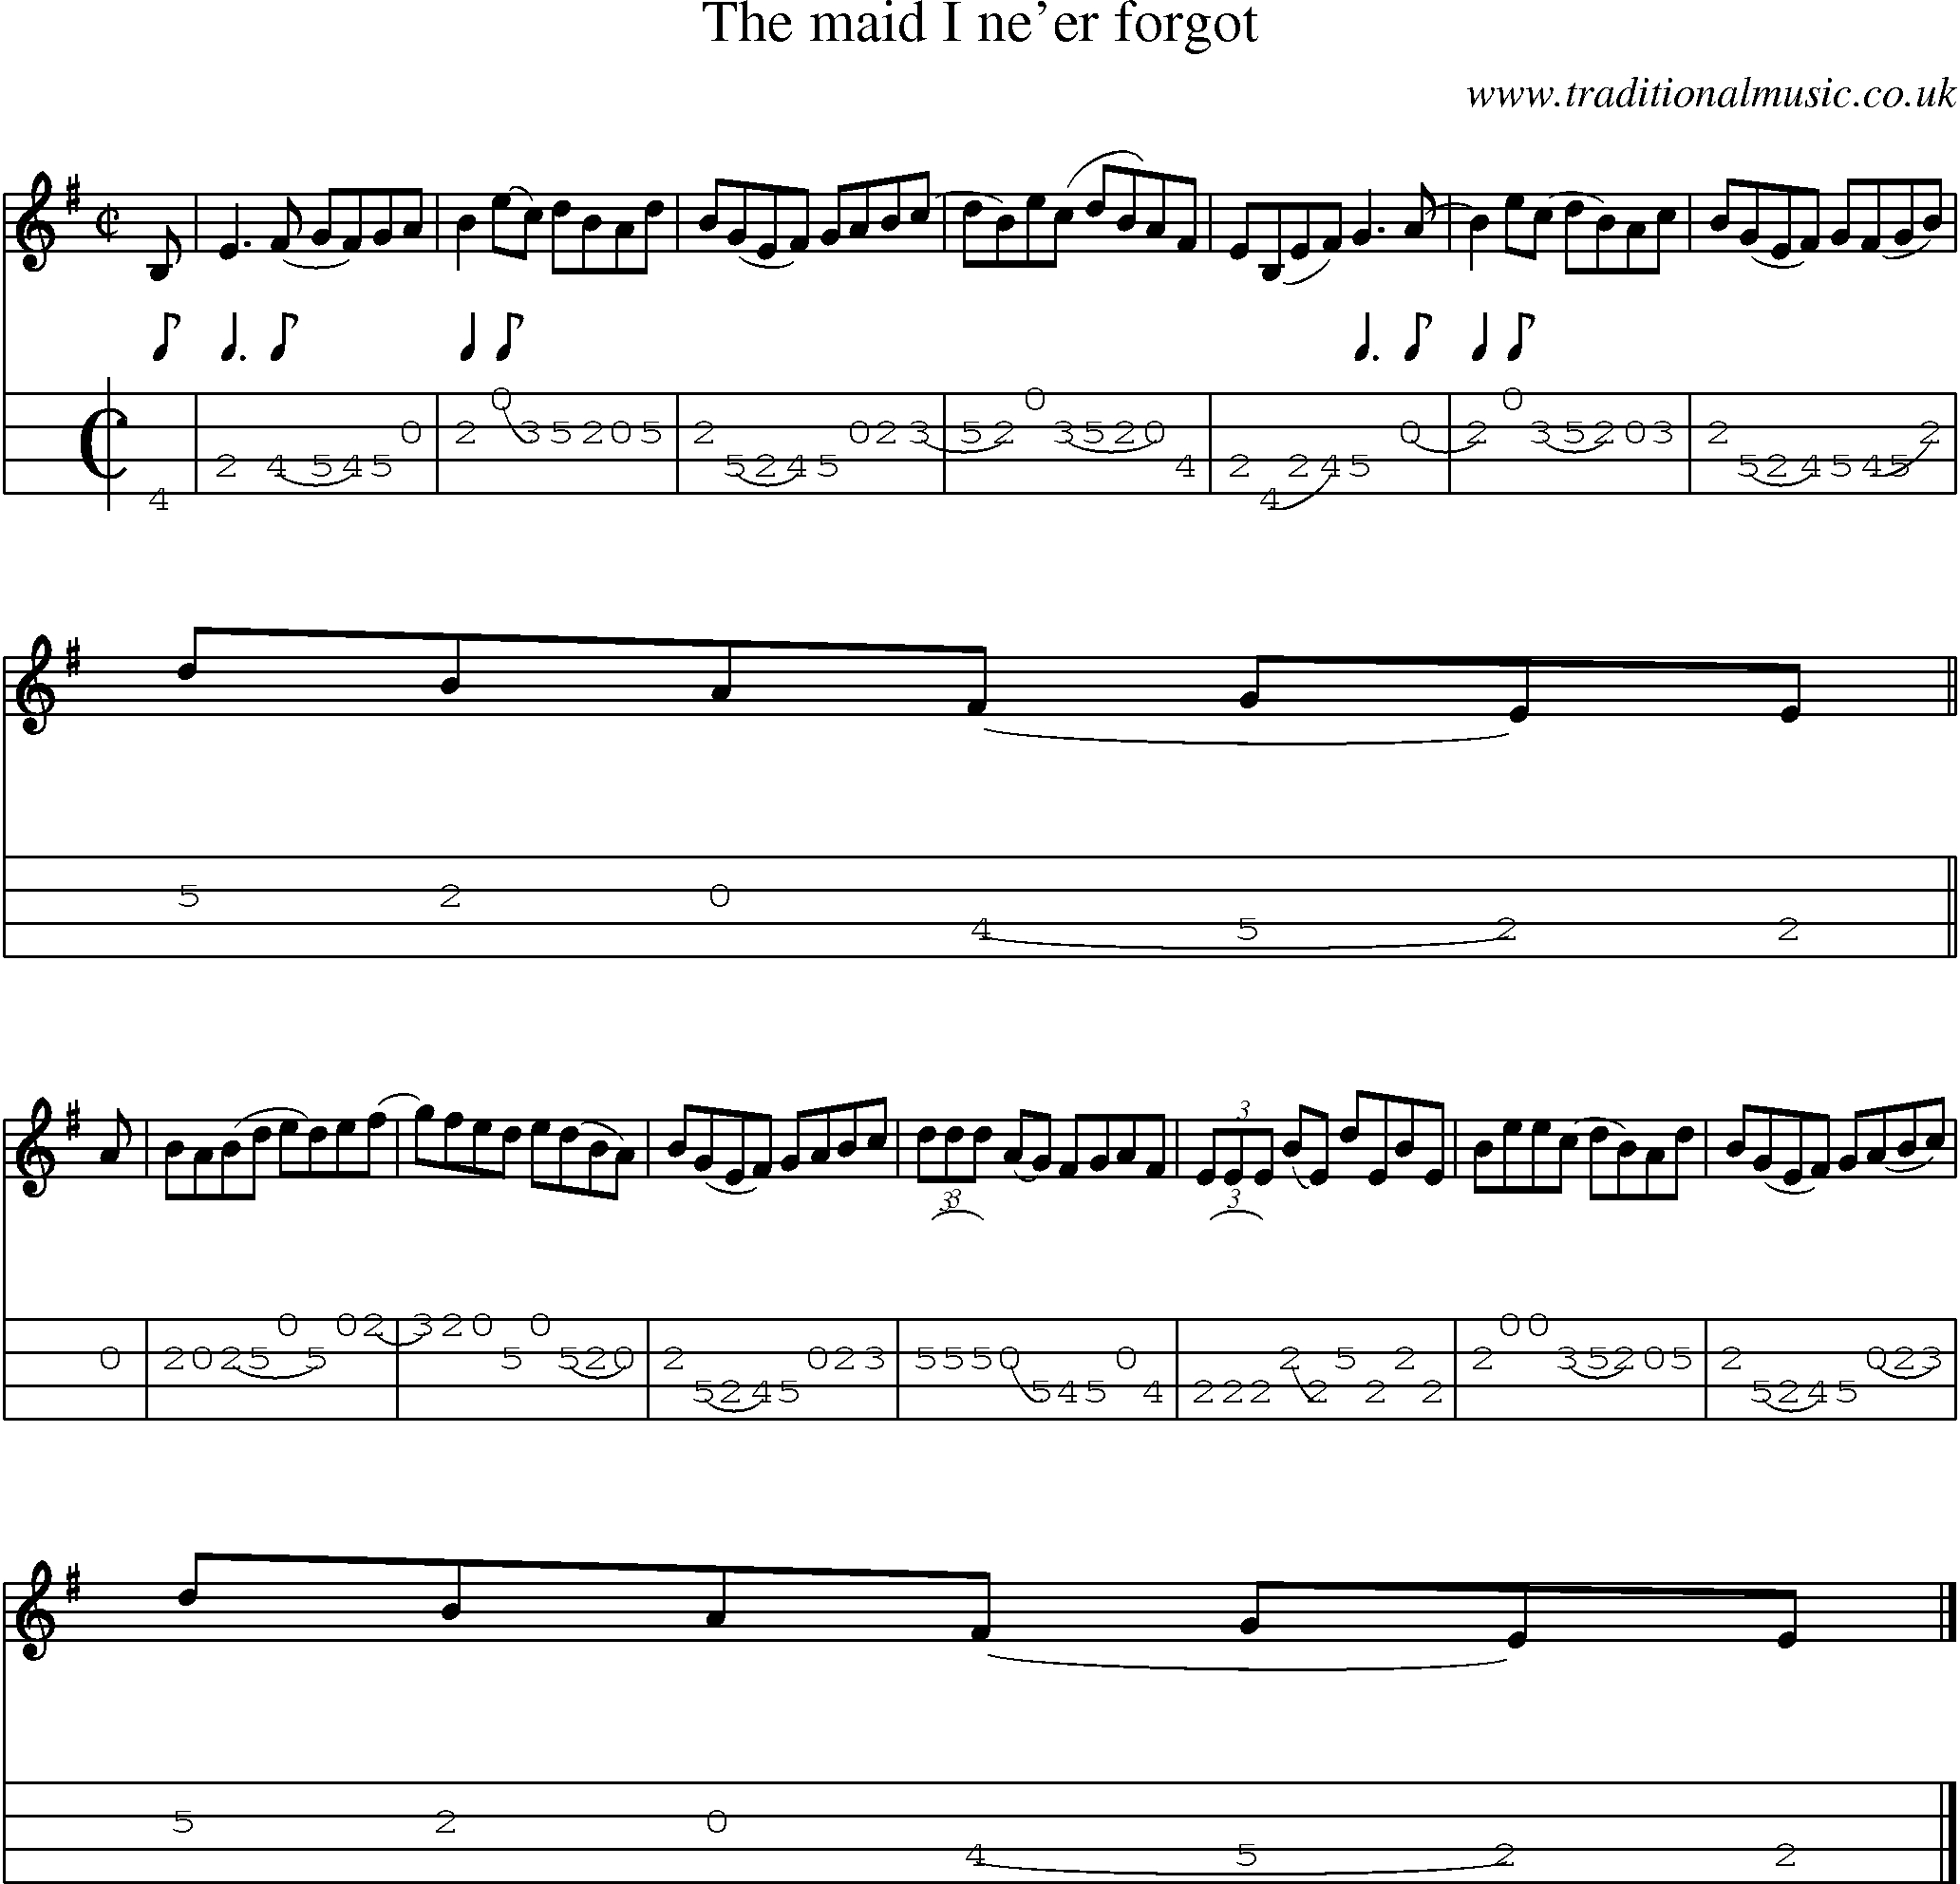 Music Score and Mandolin Tabs for Maid I Neer Forgot